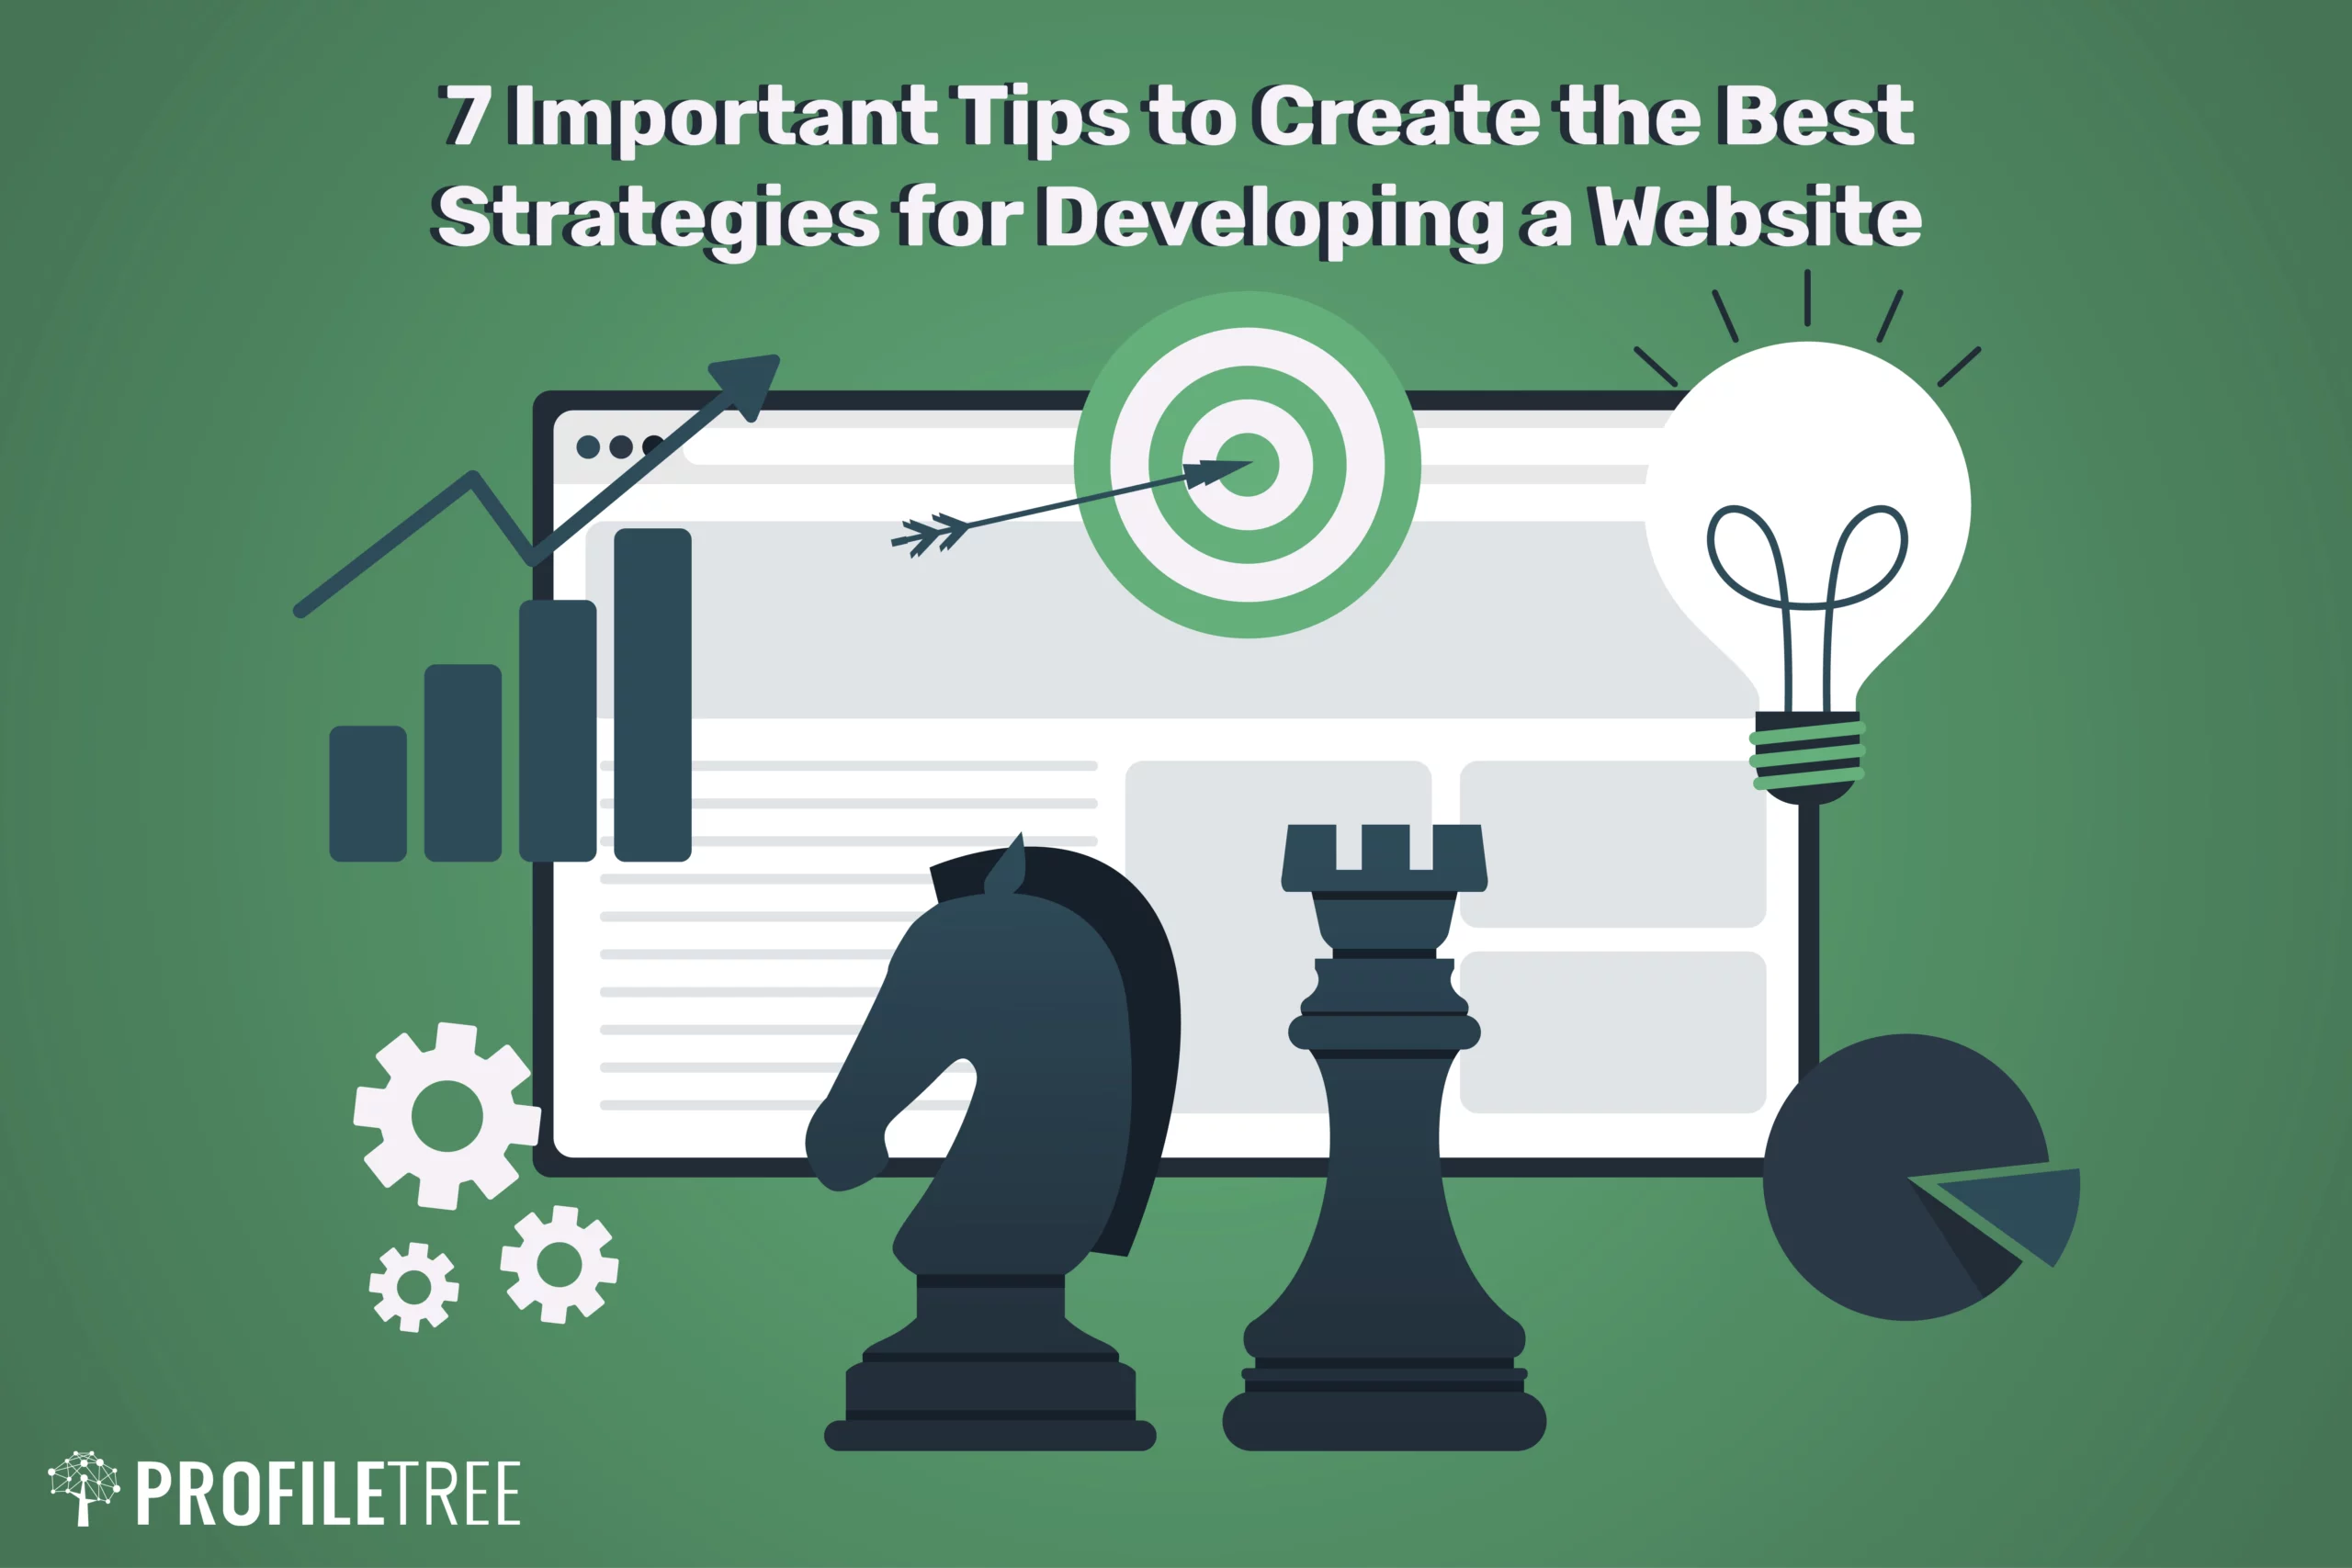 7 Important Tips to Create the Best Strategies for Developing a Website